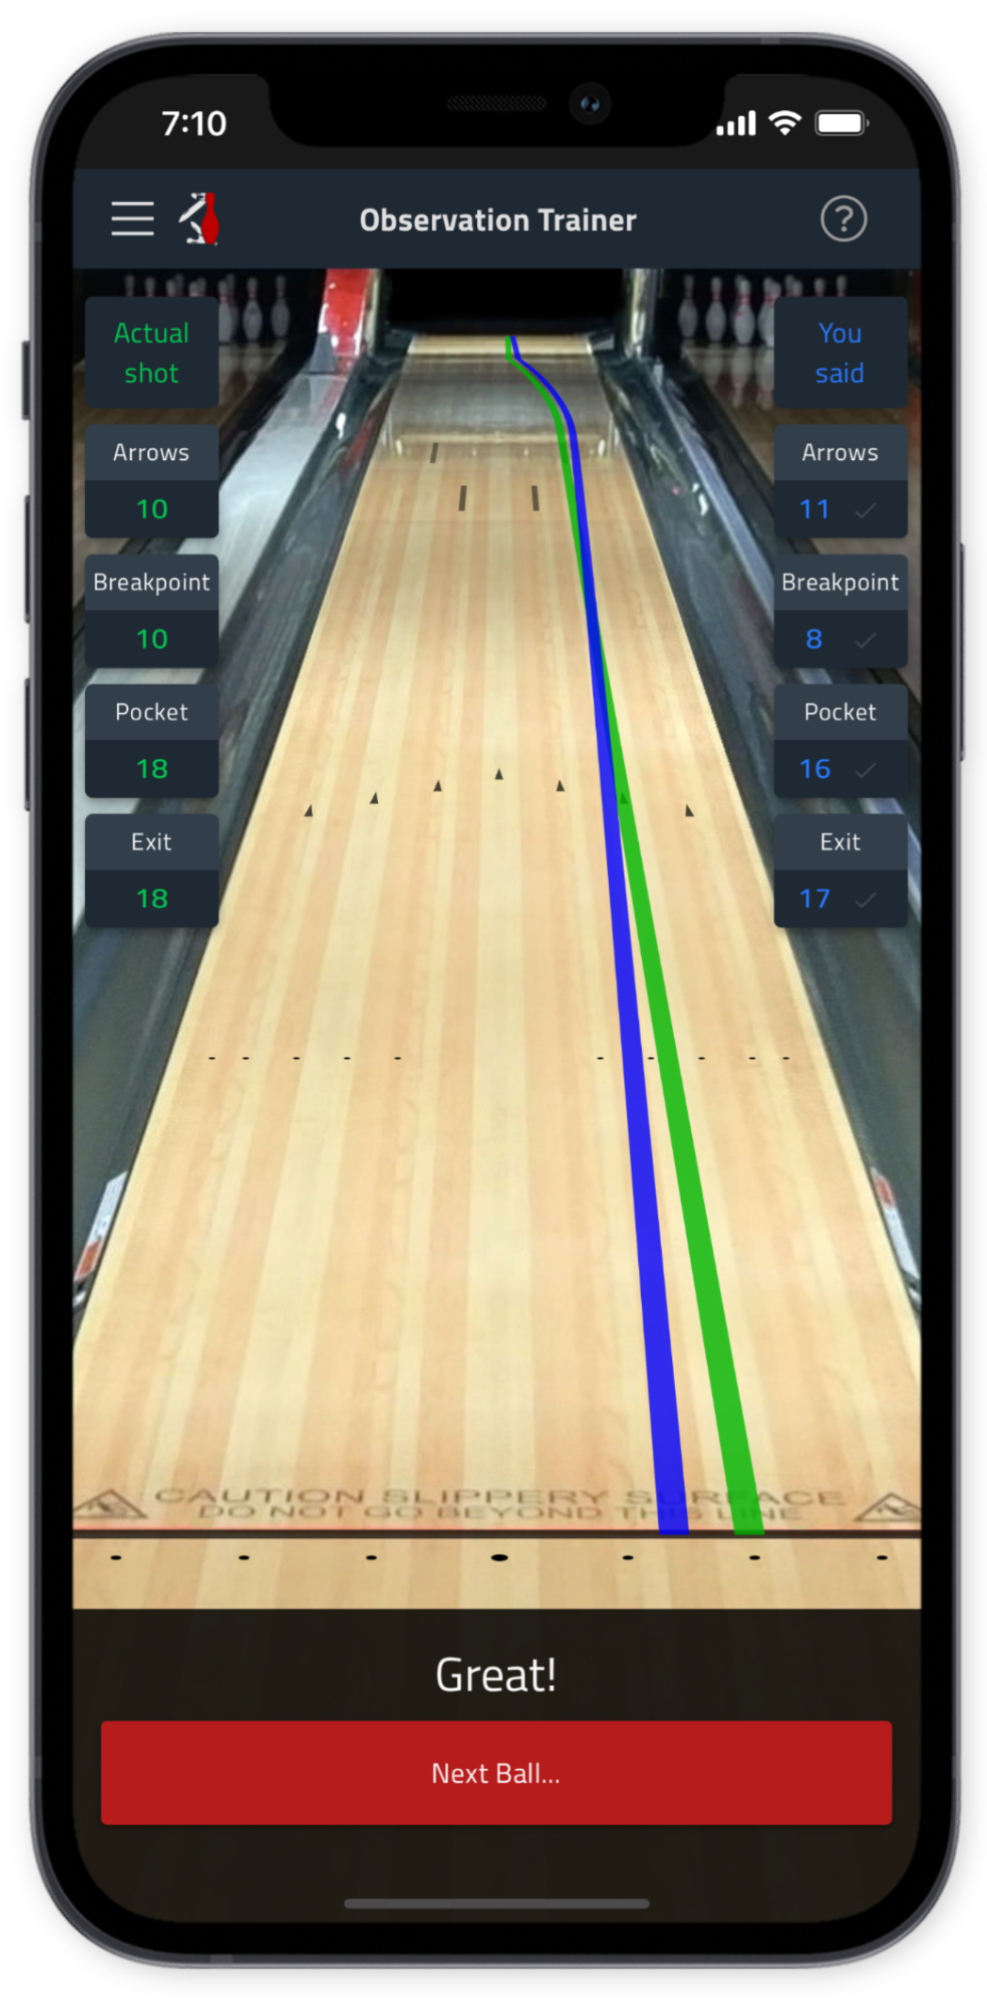 Training tool for observation of bowling ball motion